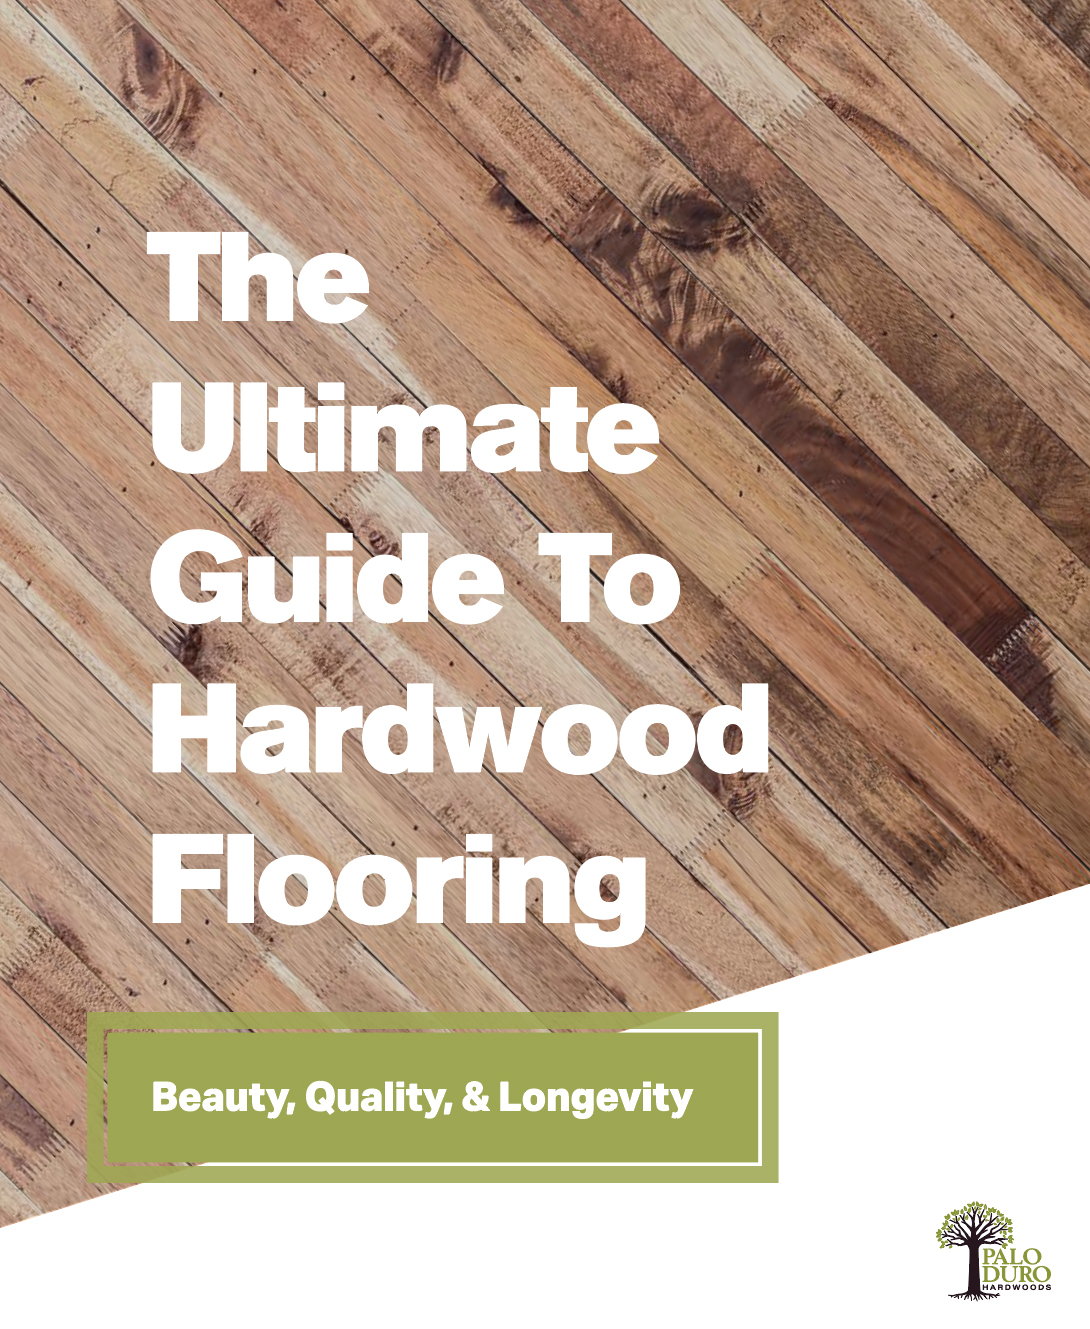 The Ultimate Guide to Hardwood Flooring